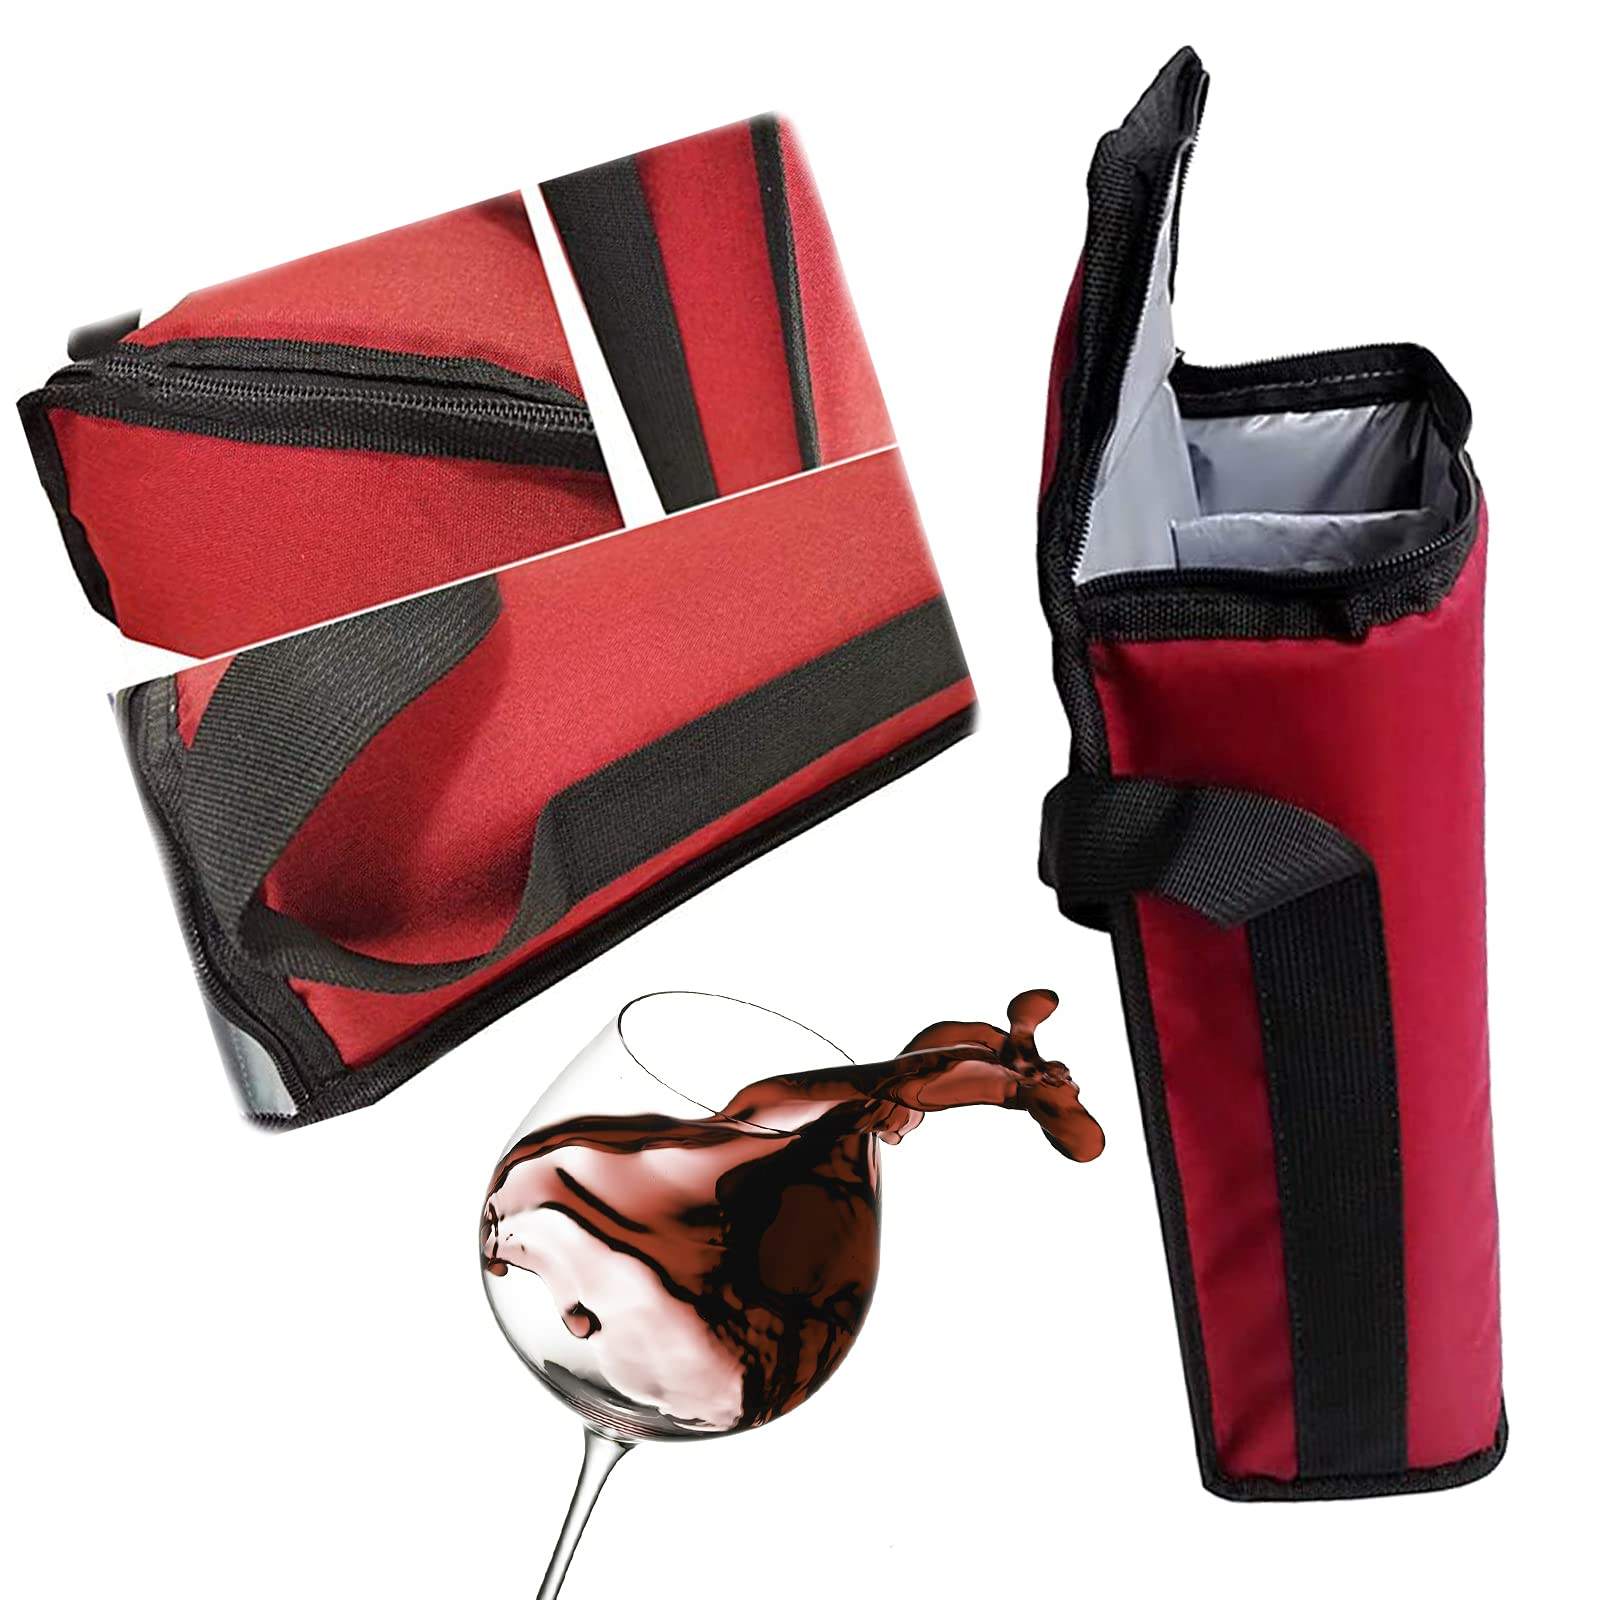 2 Bottle Wine Carrier Bag Tote Insulated Champagne Waterproof Picnic Wine Cooler Bags